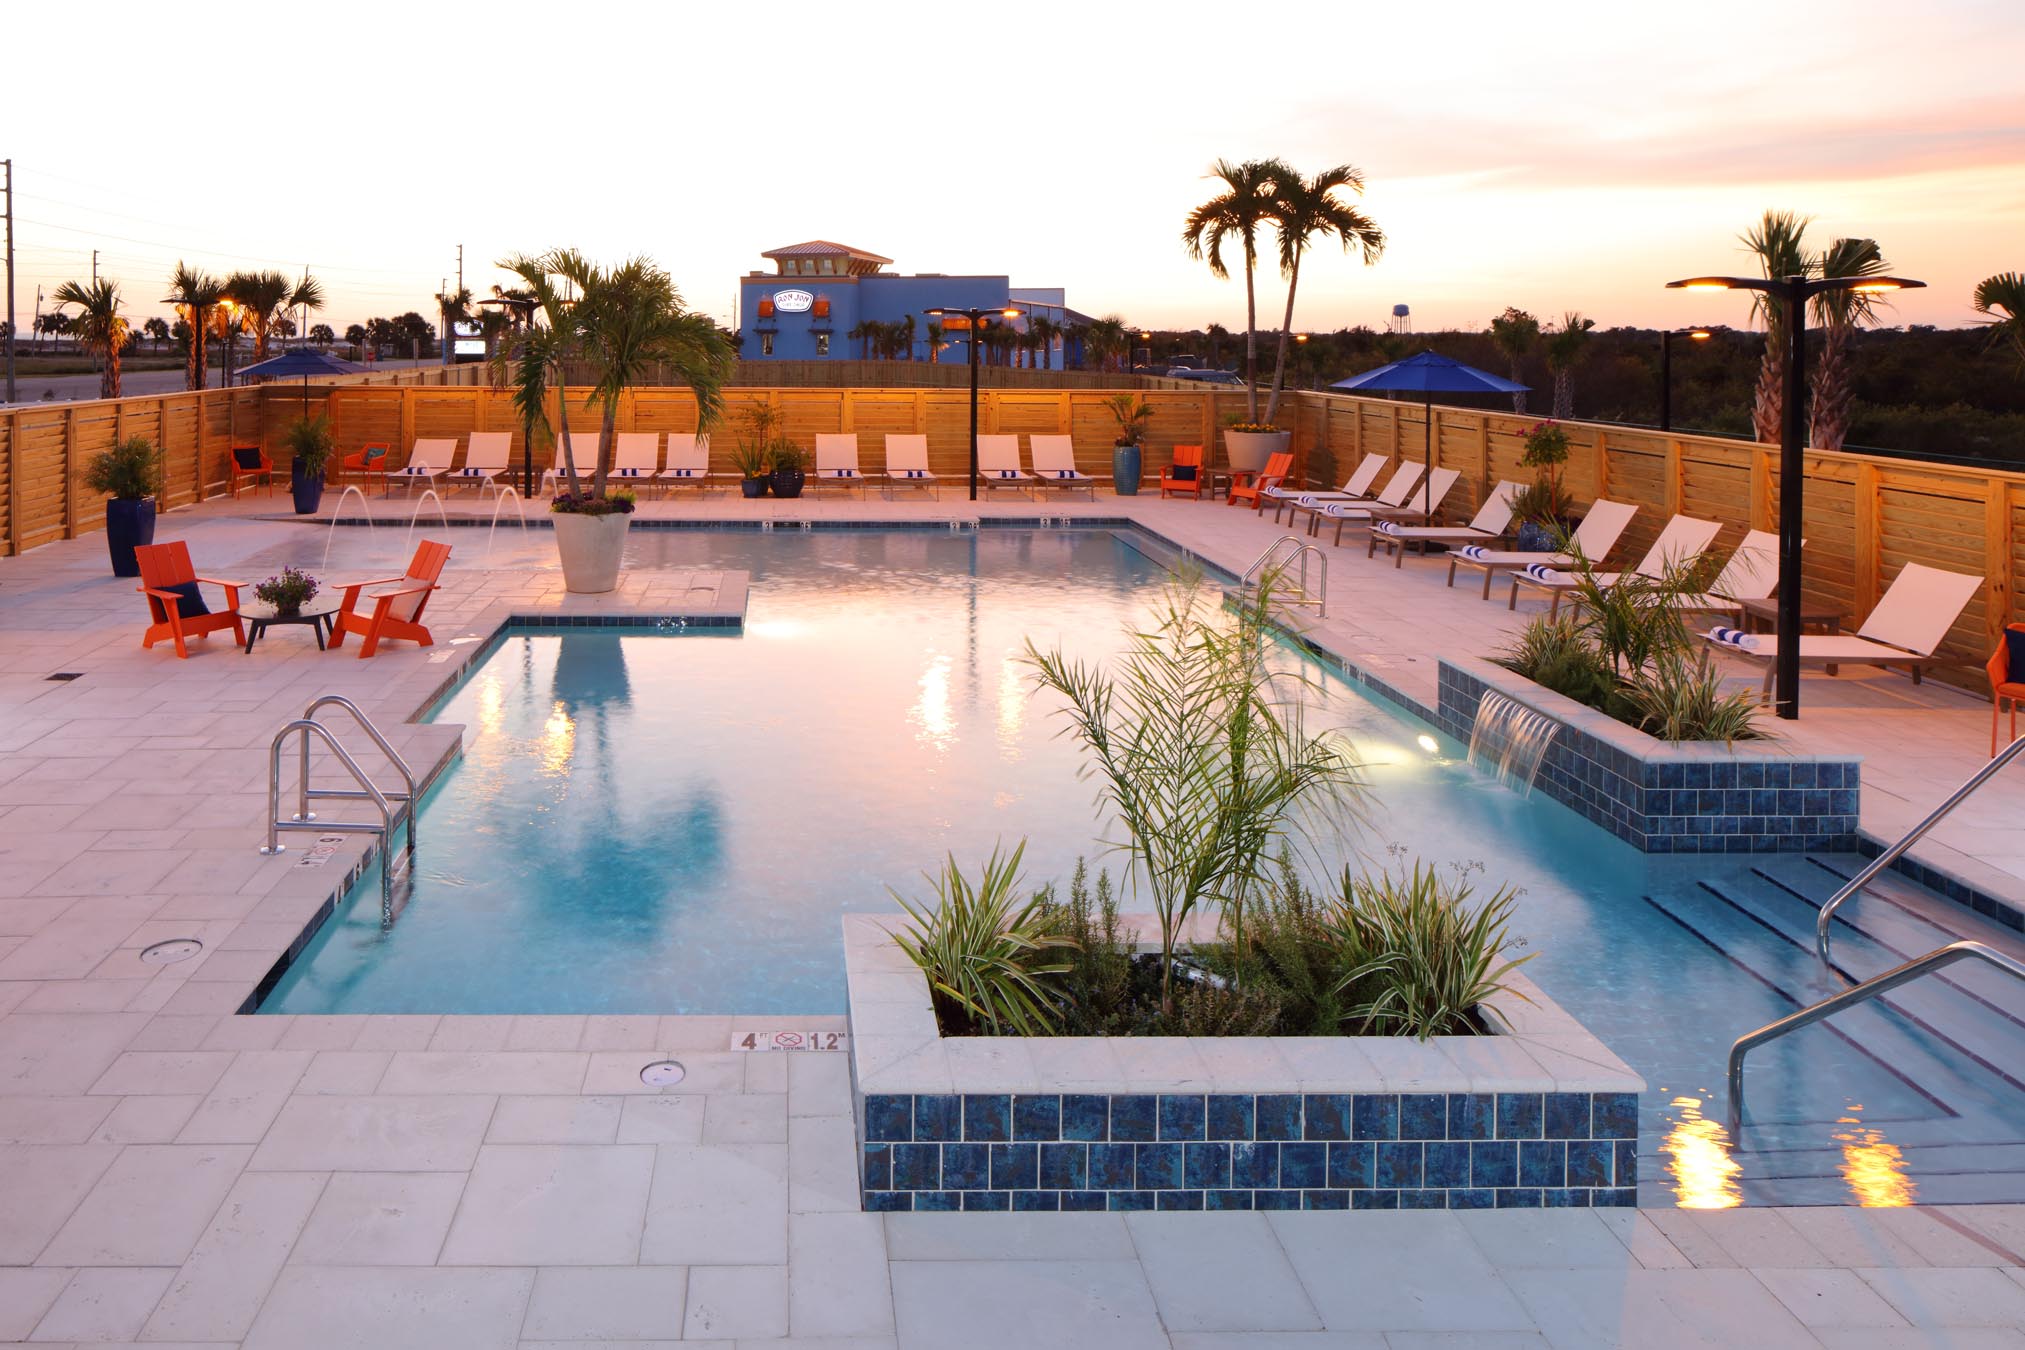 outdoor pool at sunset